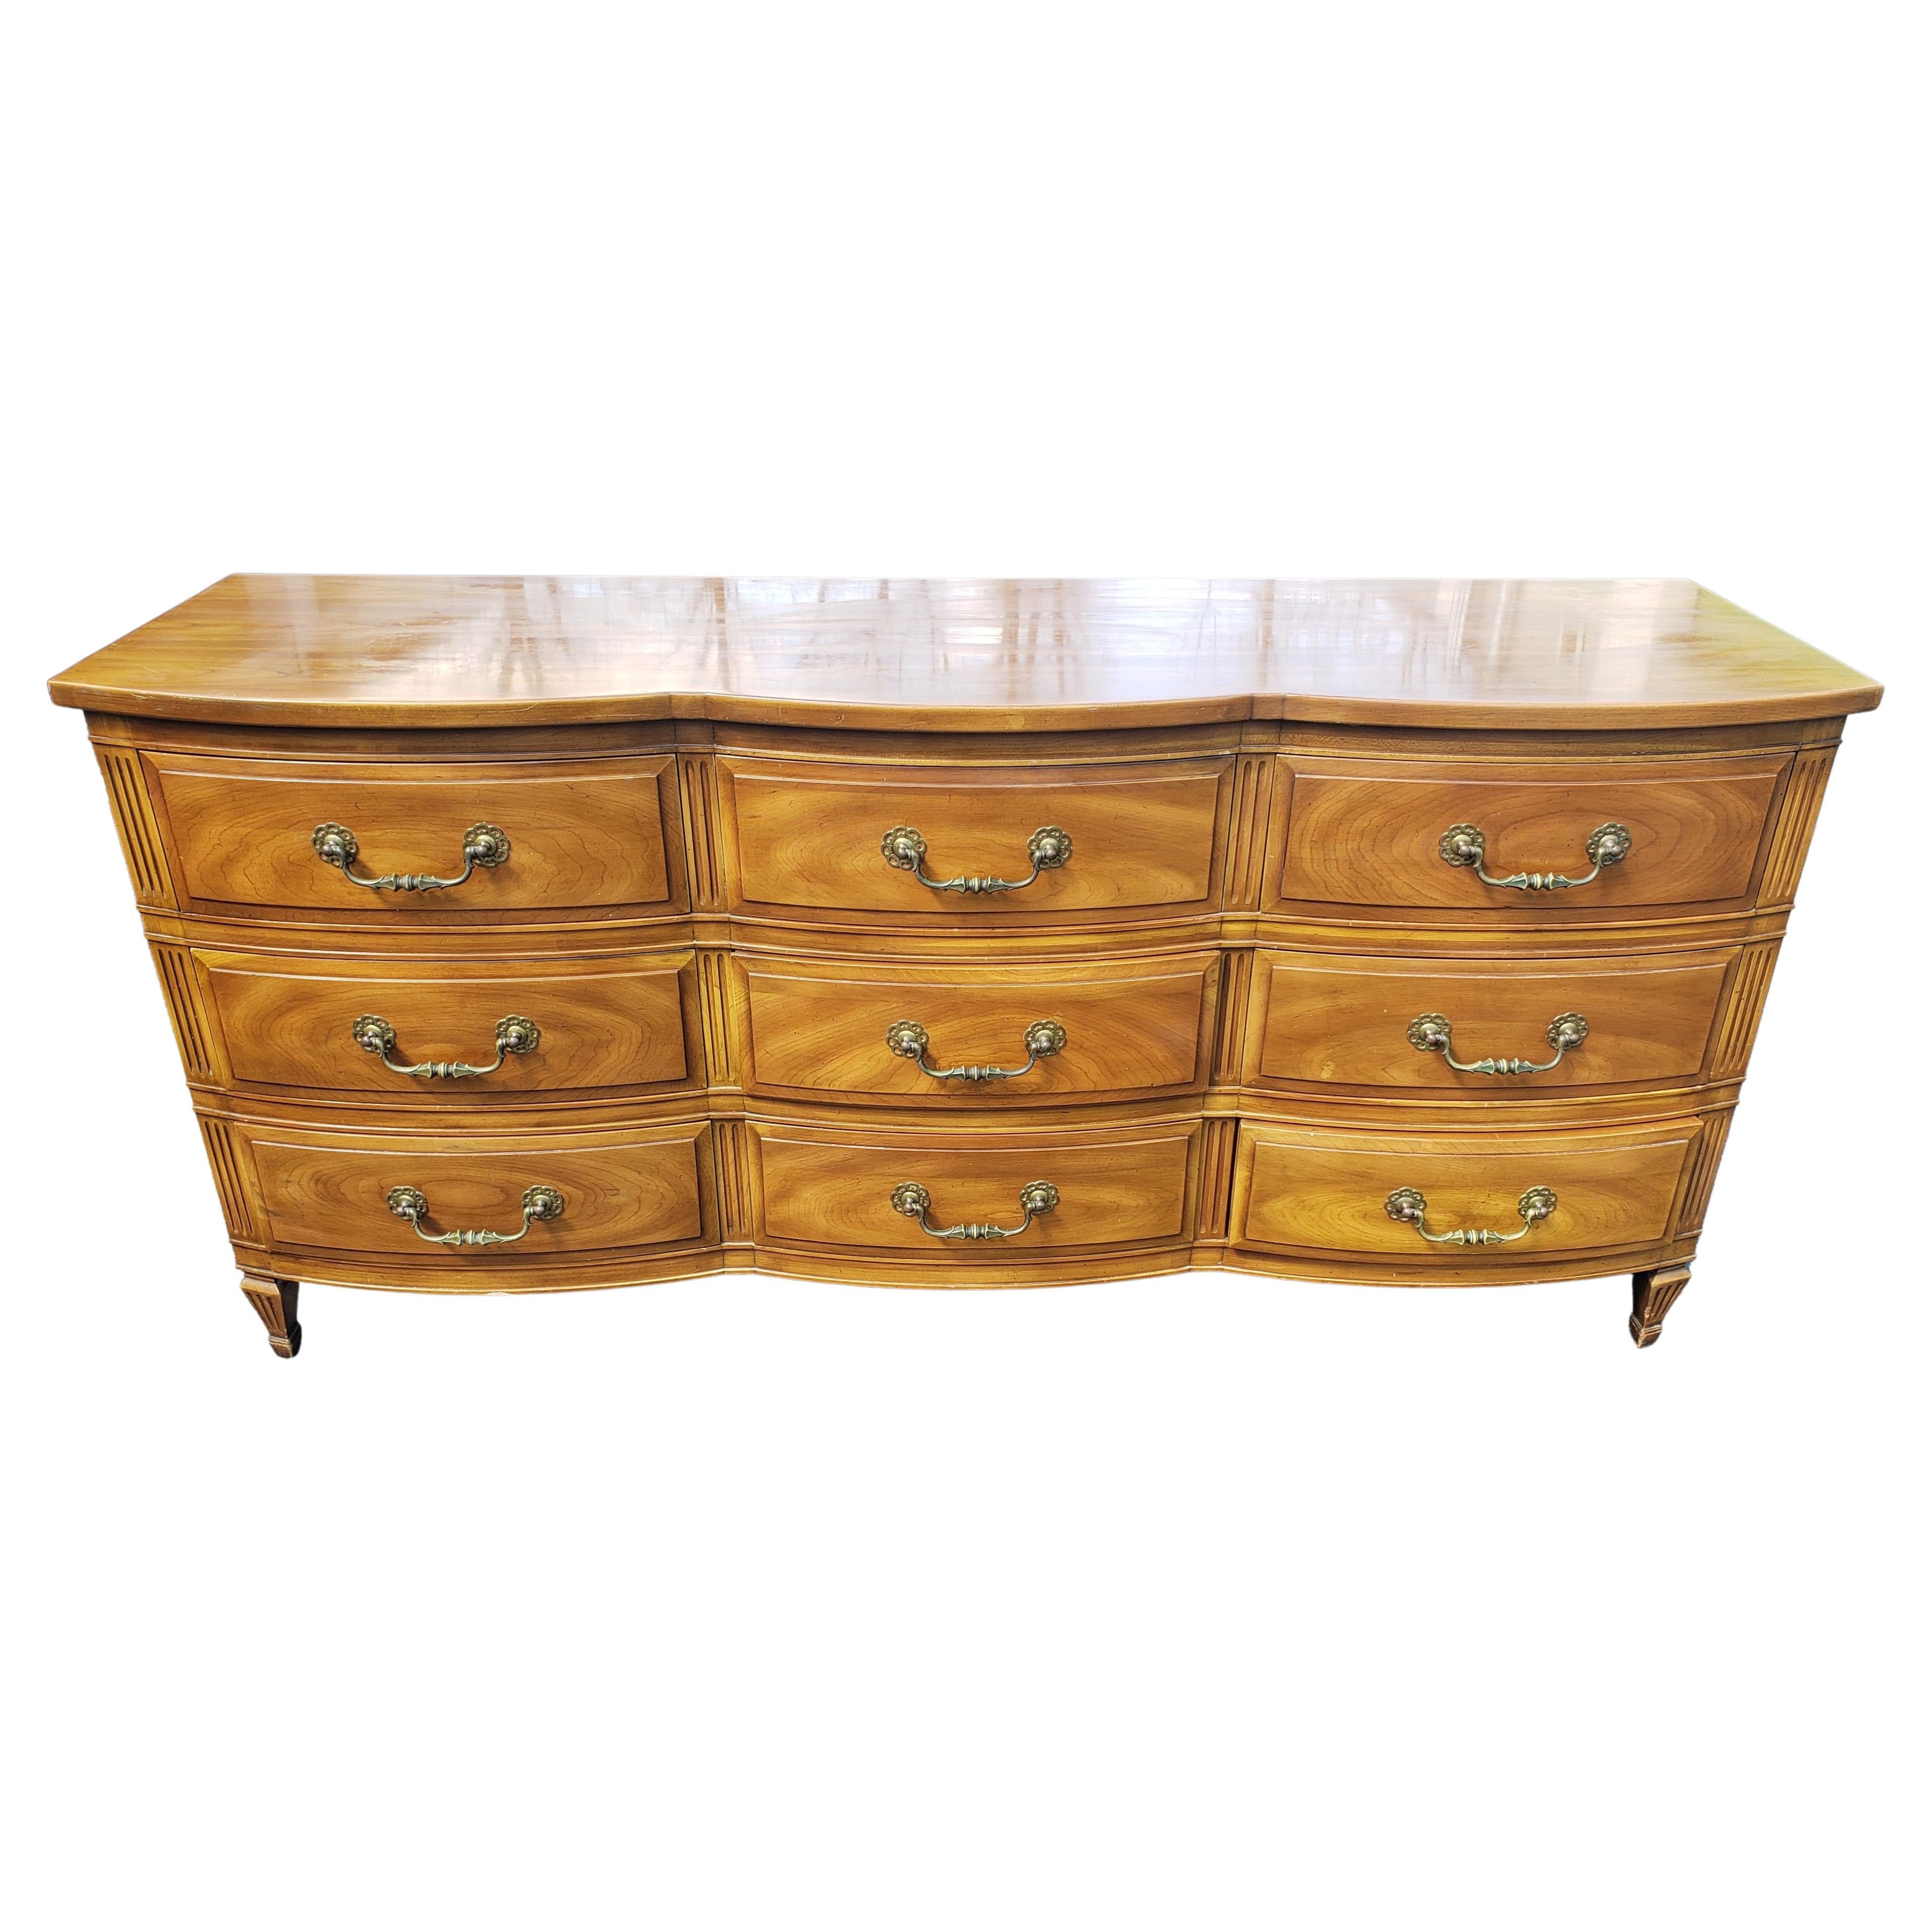 John Widdicomb French Country Serpentine triple Dresser with protective Glass Top,
Serpentine front. Solid wood dovetailed drawers with original heavy duty brass drop pulls. Circa 1950s
Good vintage condition. Top has been protected with loose